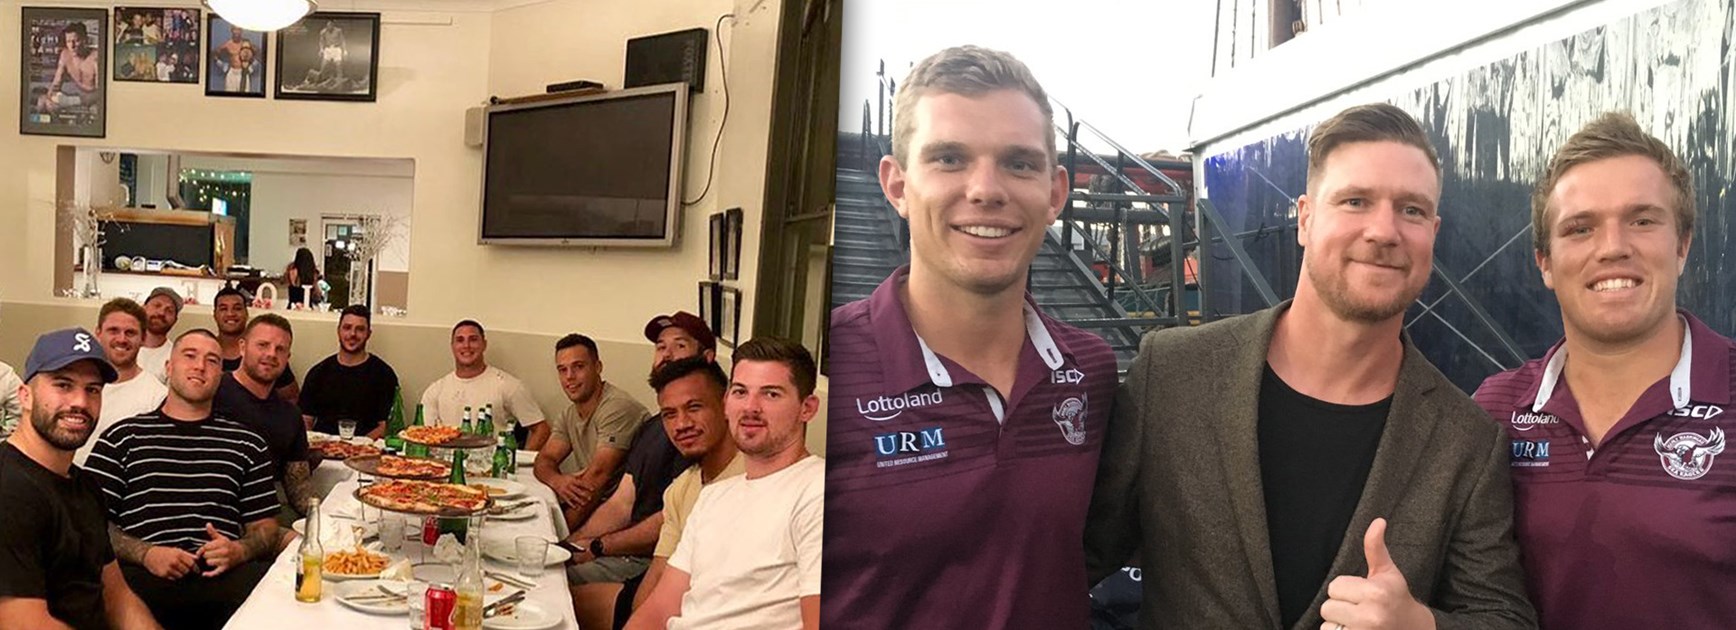 NRL Social: Pride in league and #MAFS